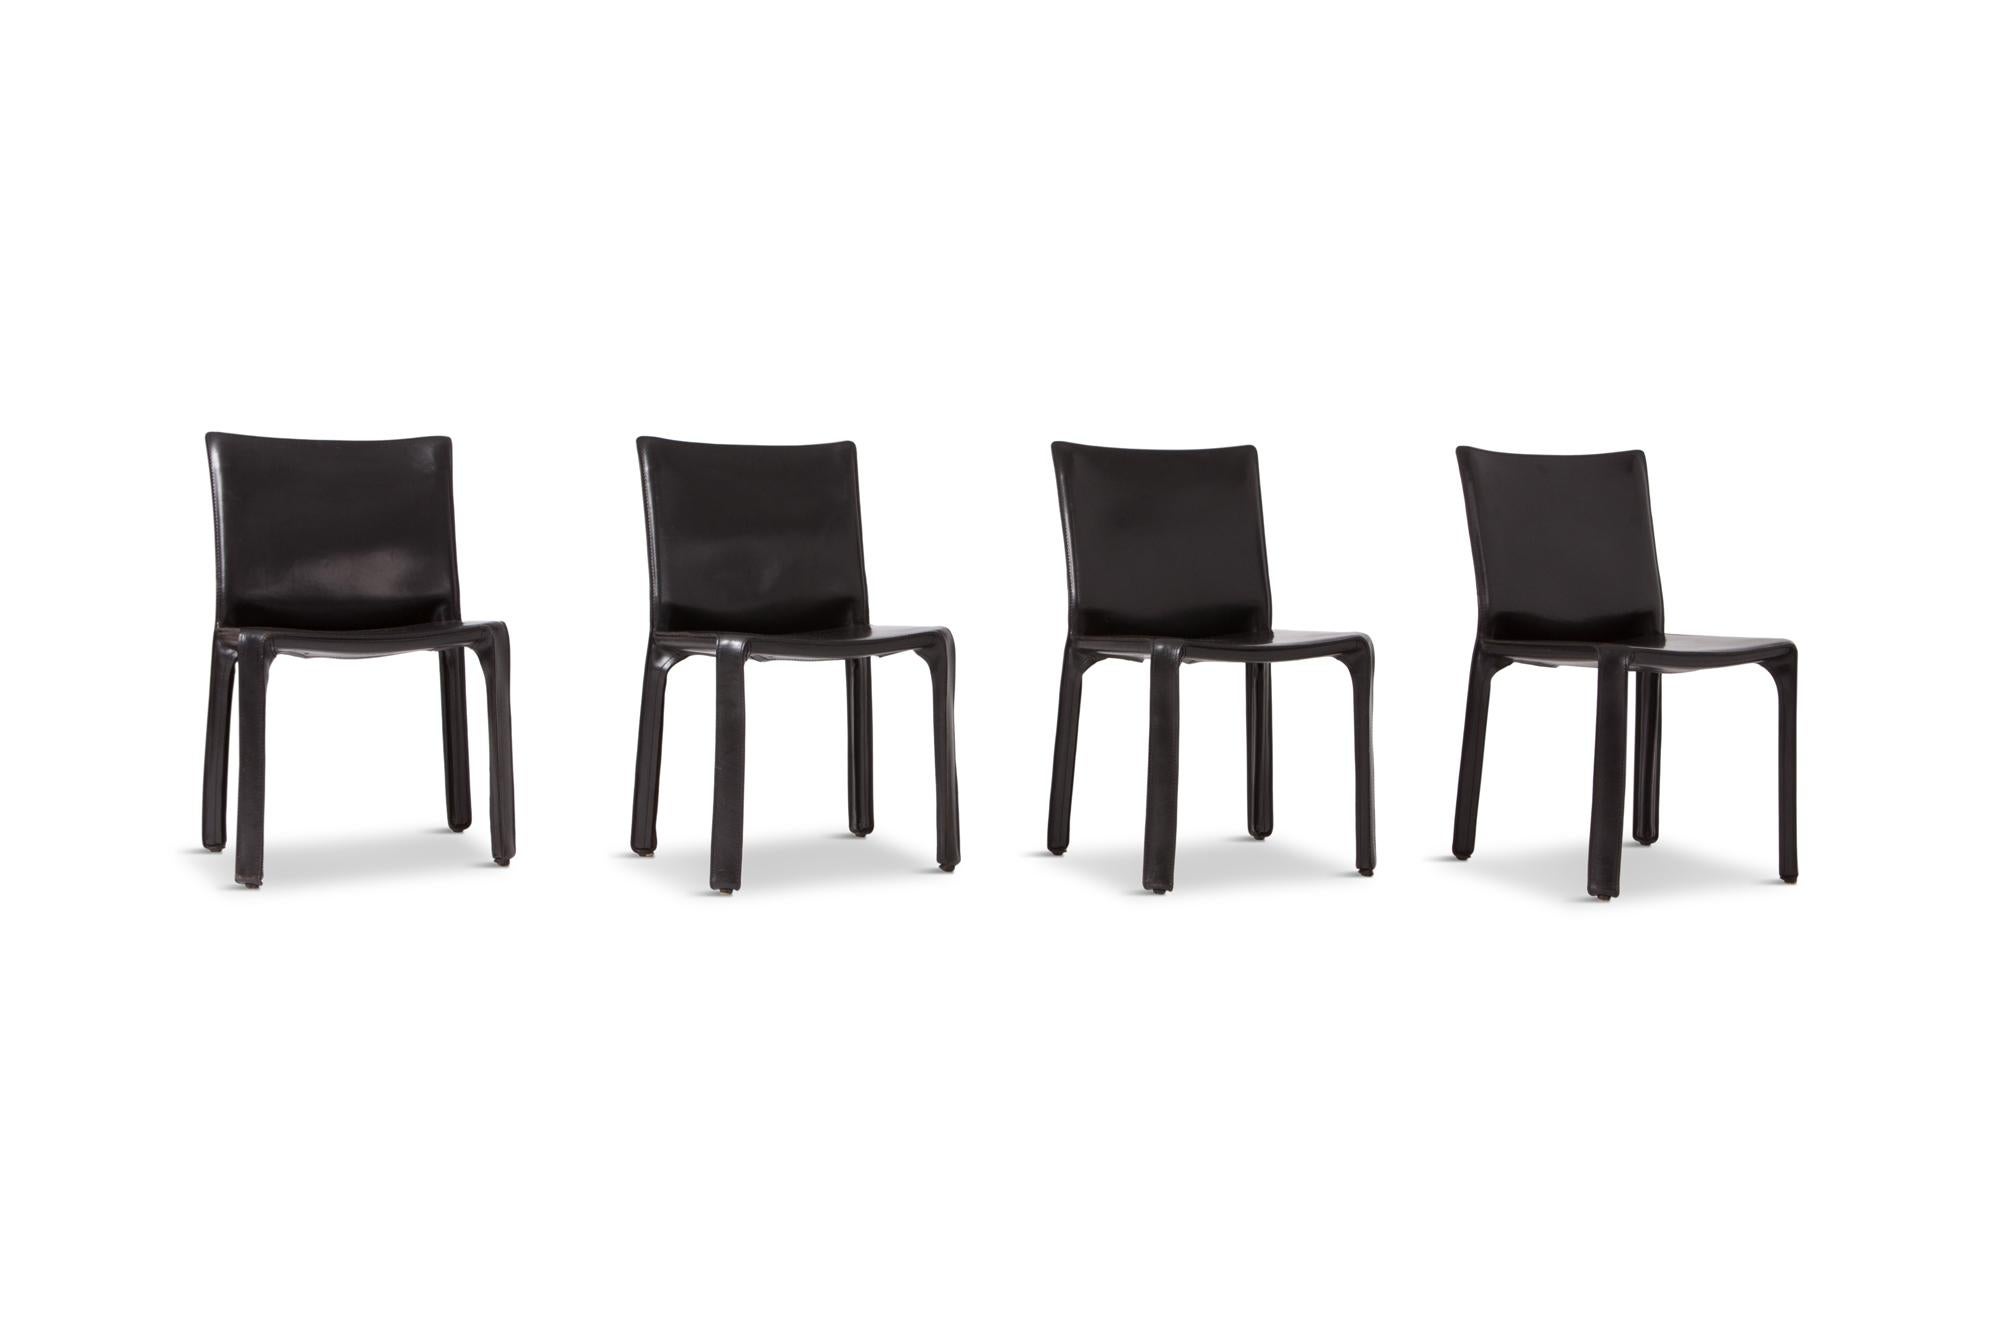 Cassina produced cab chairs, set of four by Mario Bellini, Italy, 1977

Elegant and minimalistic chairs, the base is made from a tubular steel skeleton that is covered with beautiful thick black leather that give these chairs stunning character.